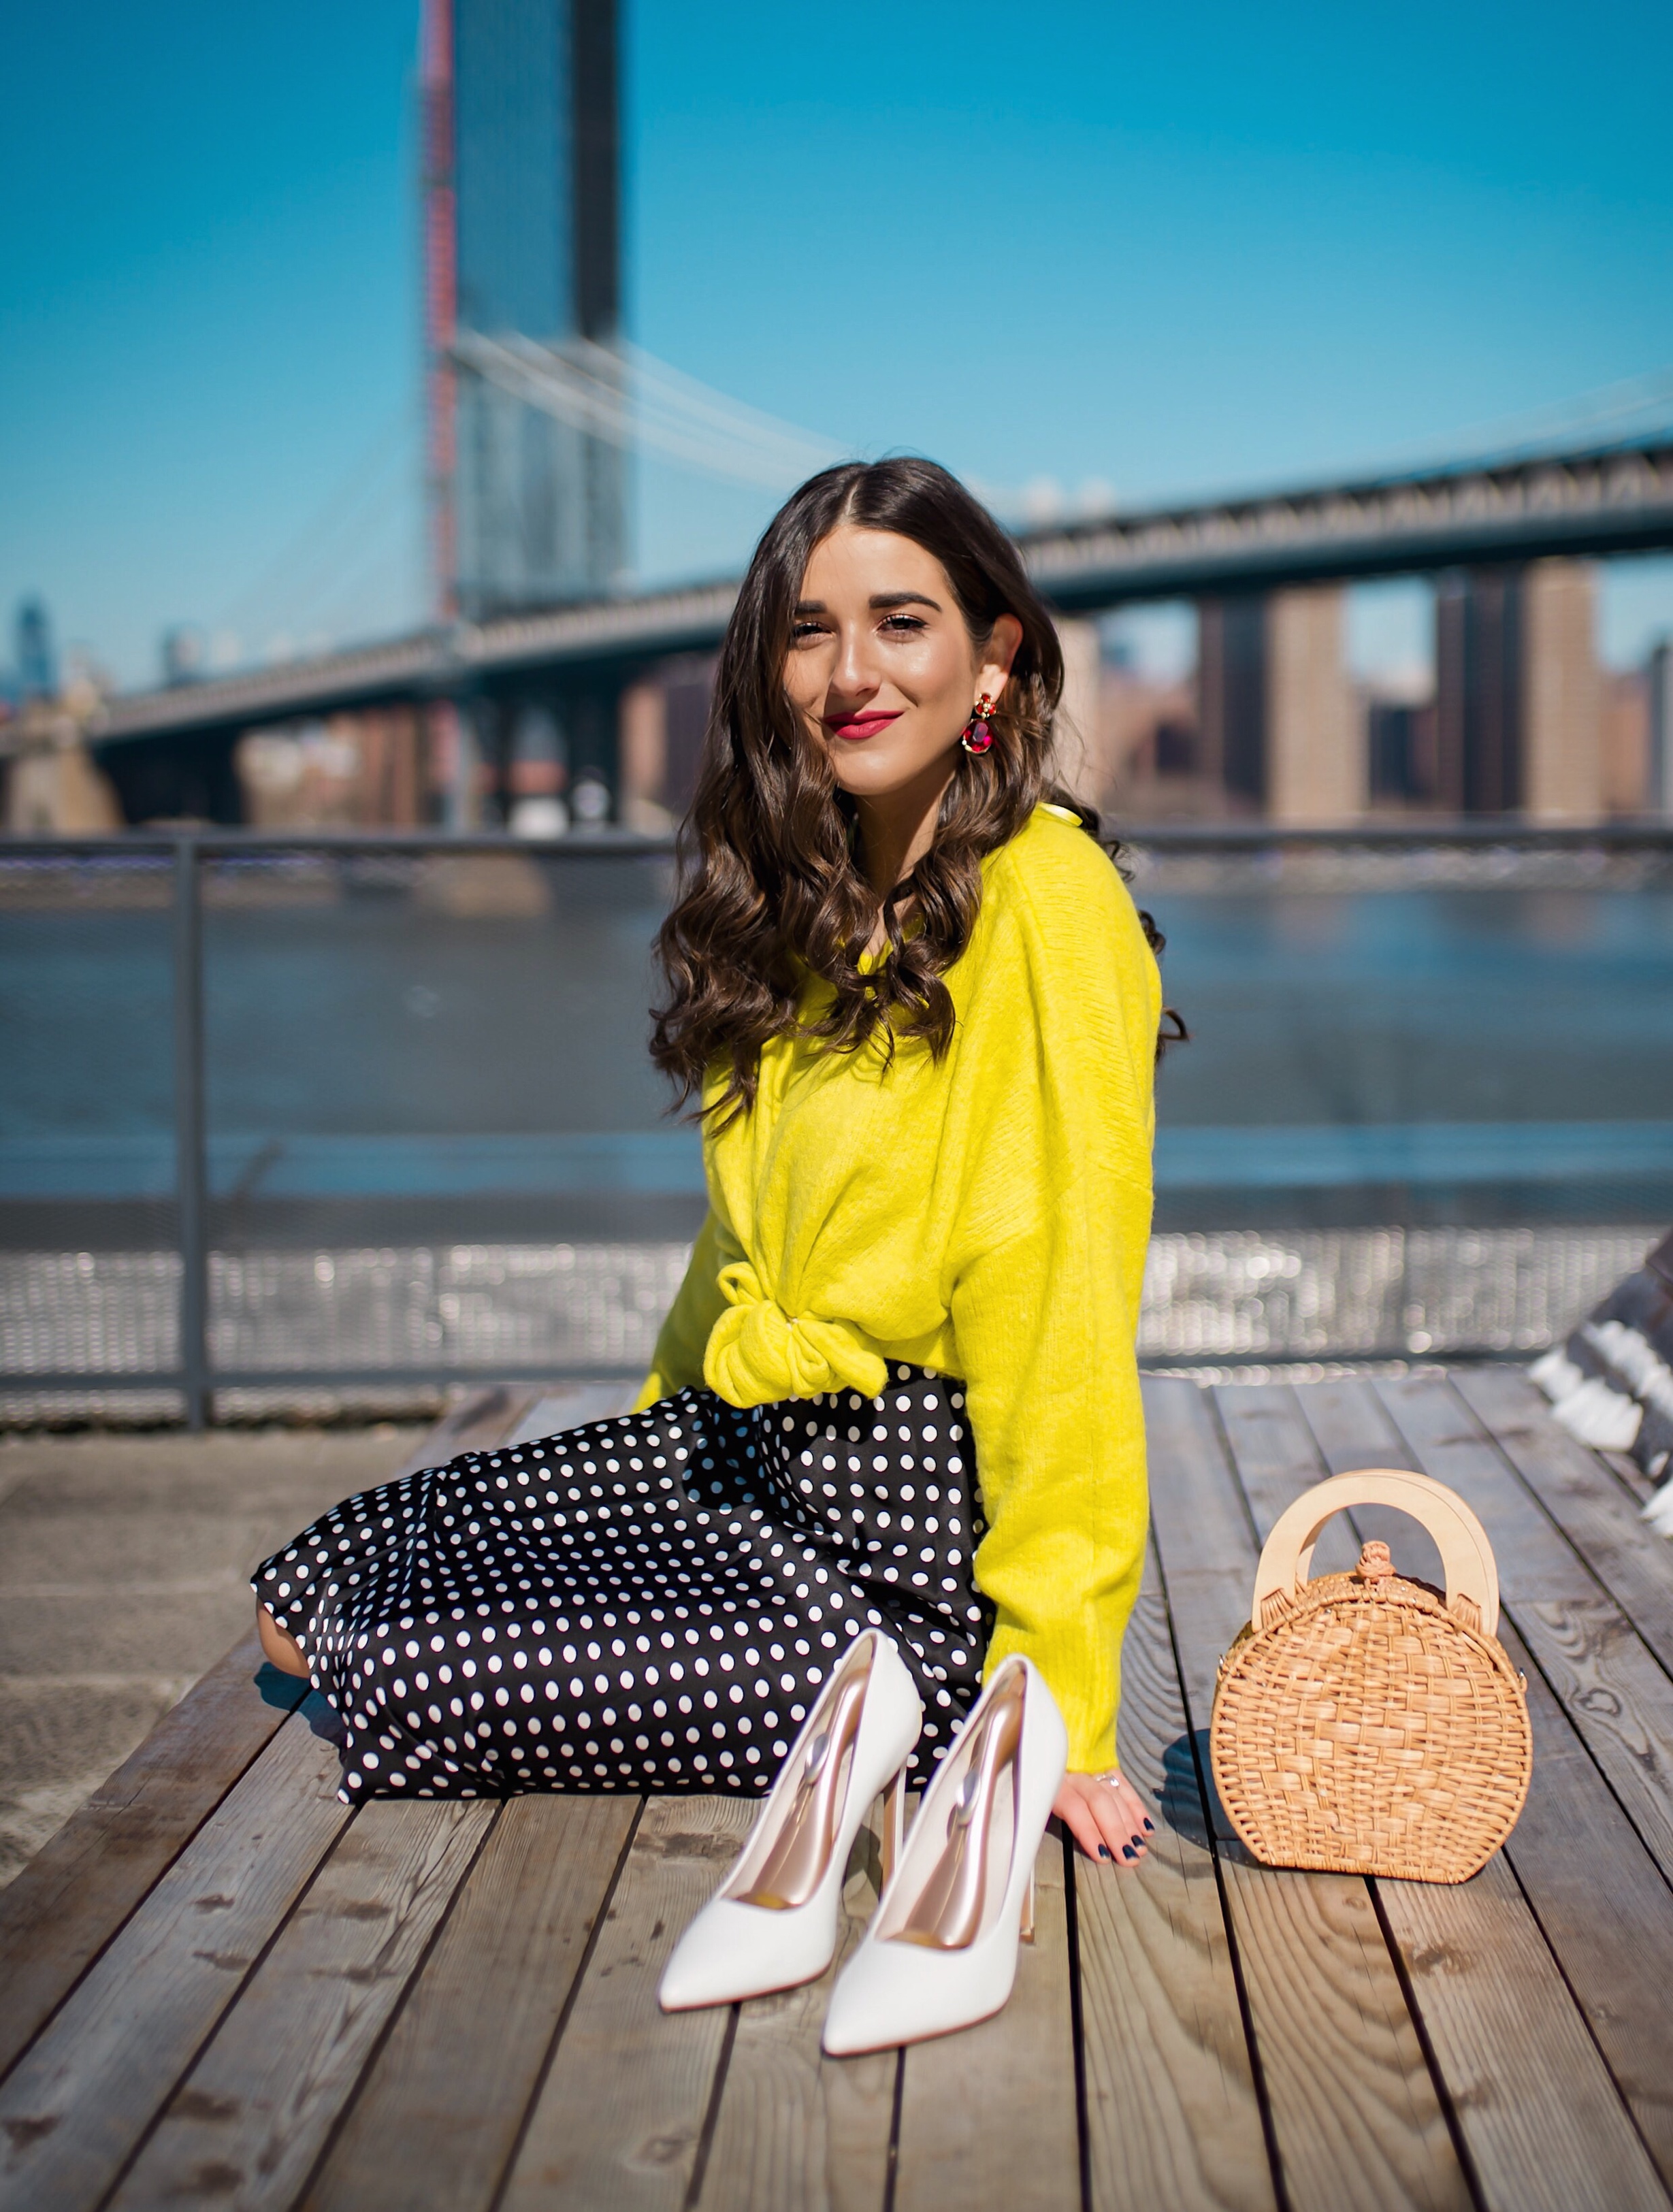 How I Wound Up With Boring White Dishes Navy Polka Dot Dress Neon Yellow Knotted Sweater Esther Santer Fashion Blog NYC Street Style Blogger Outfit OOTD Trendy Shopping Girl What How To Wear White Heels Brooklyn Bridge Laurel Creative Photoshoot Dumbo.JPG